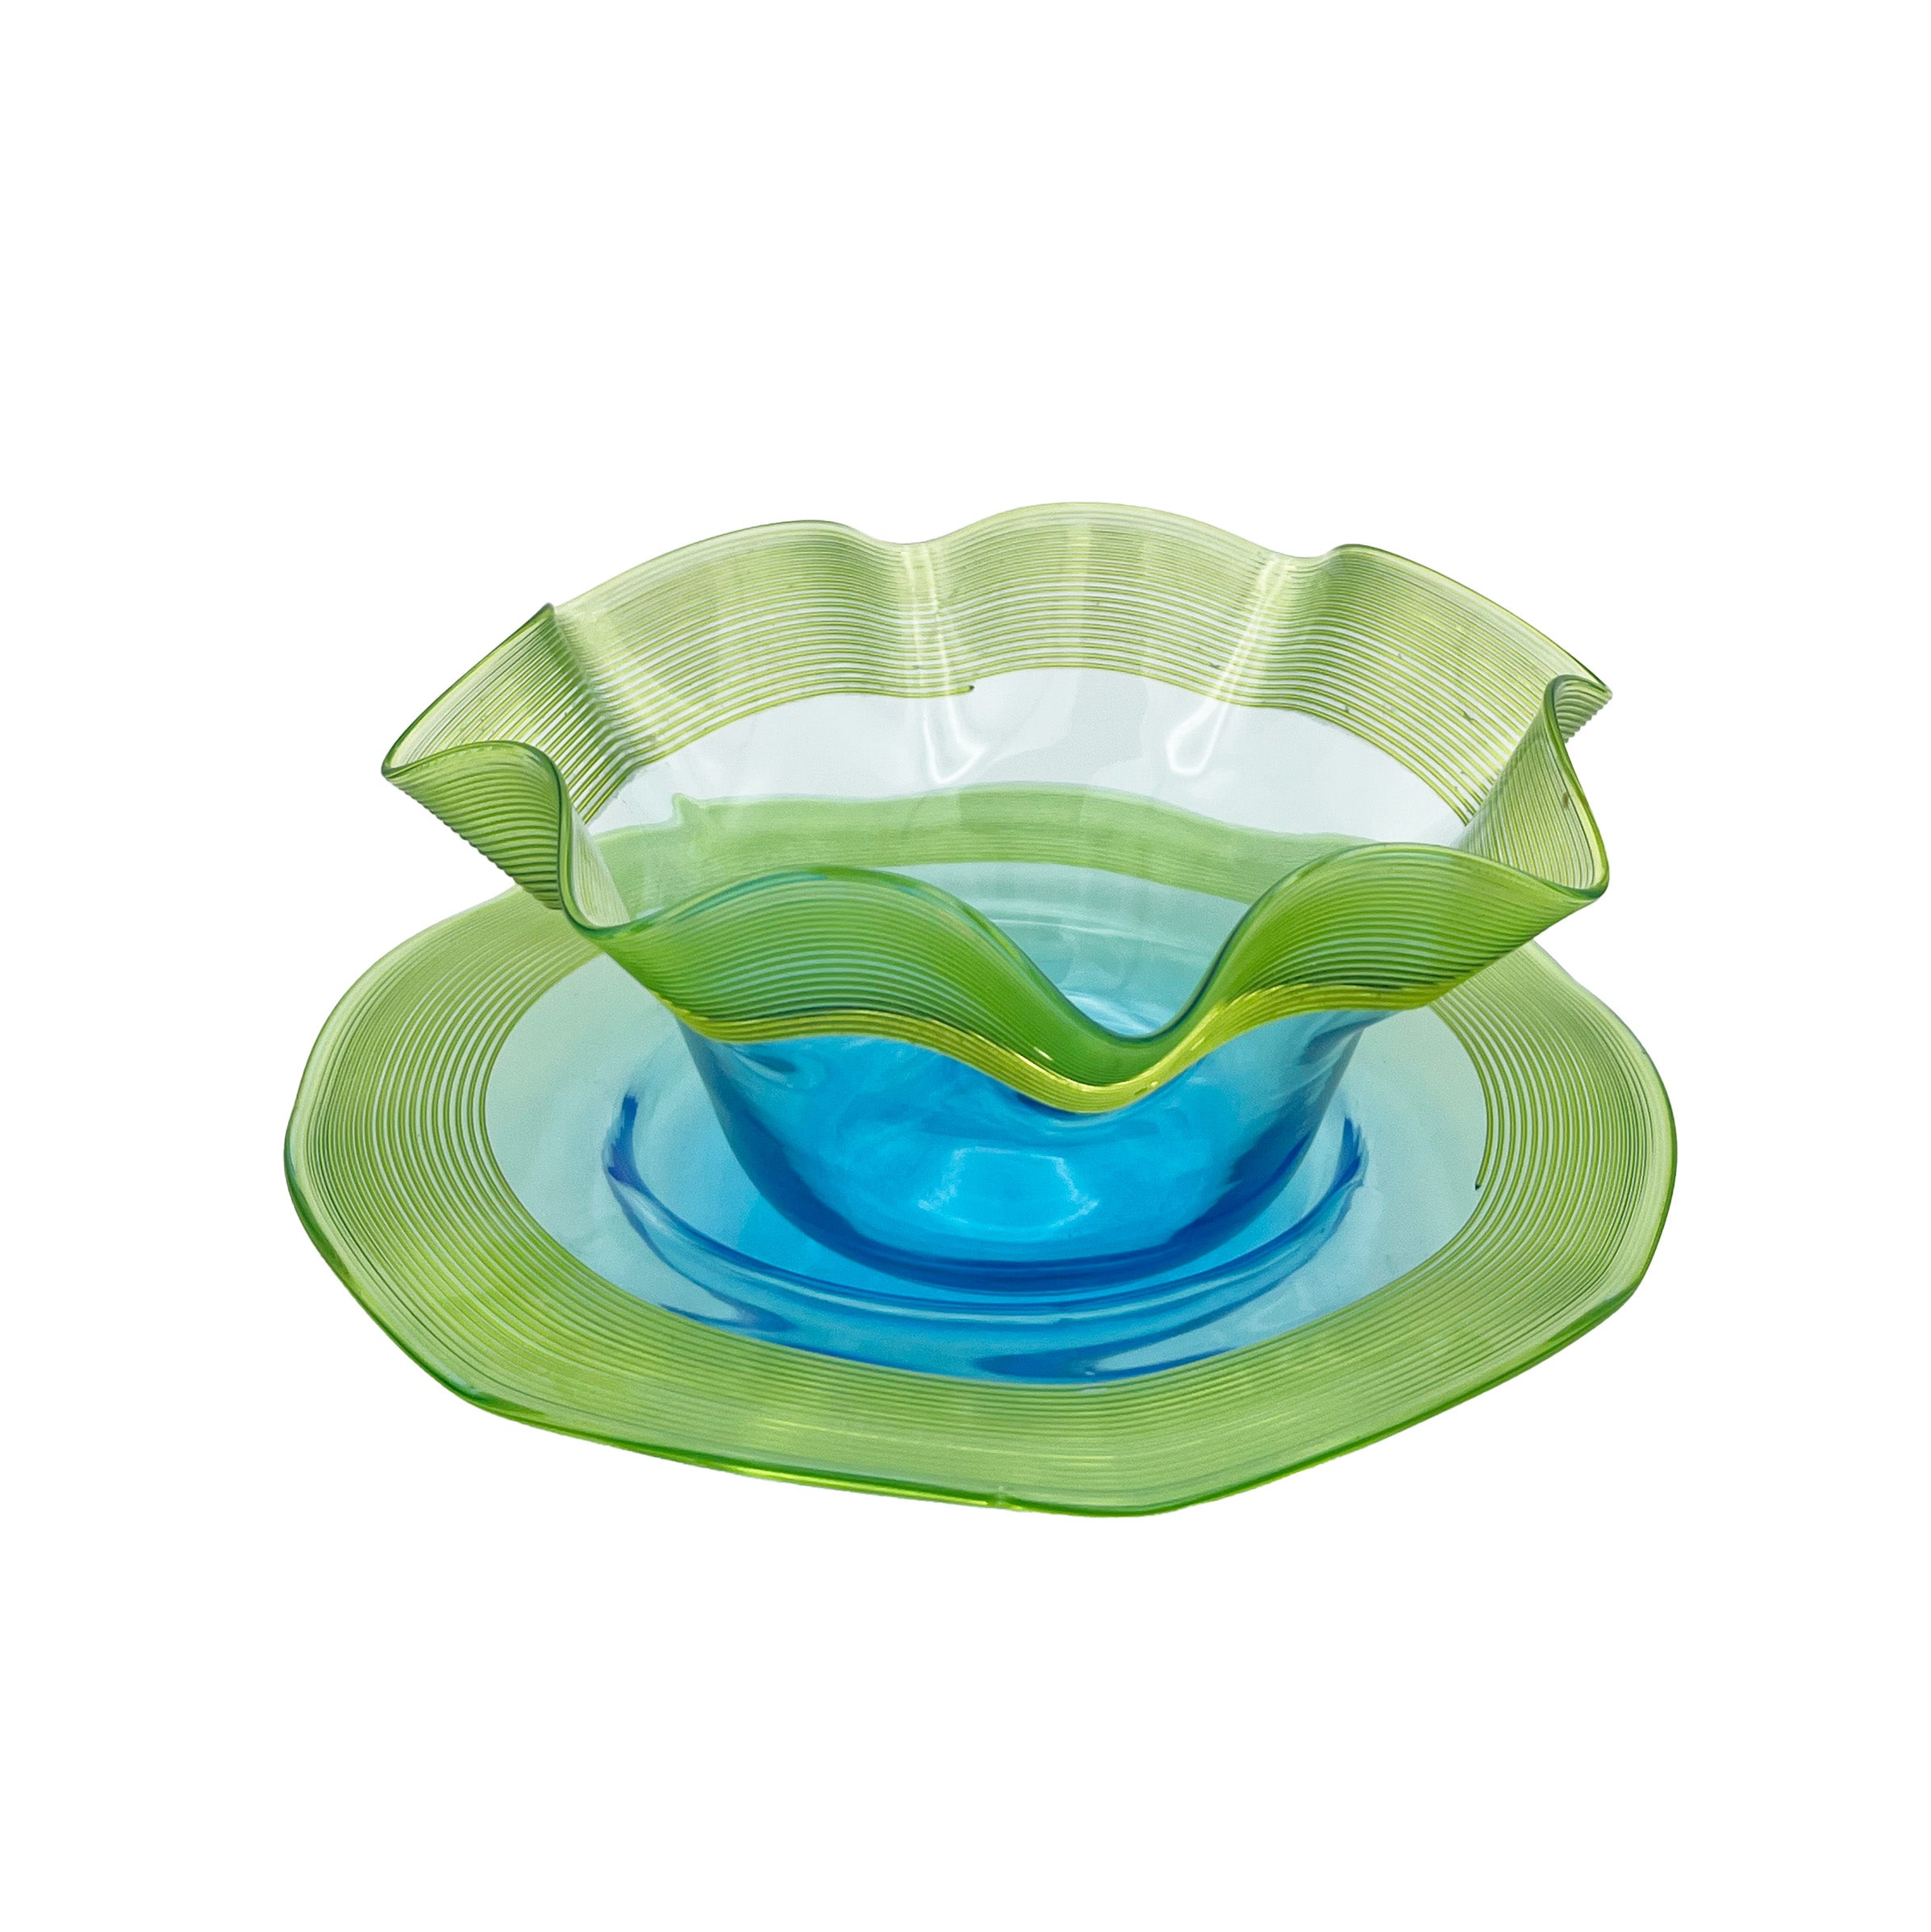 Nina Campbell Antique Blue and Green glass bowl and dish with scalloped edge on white background